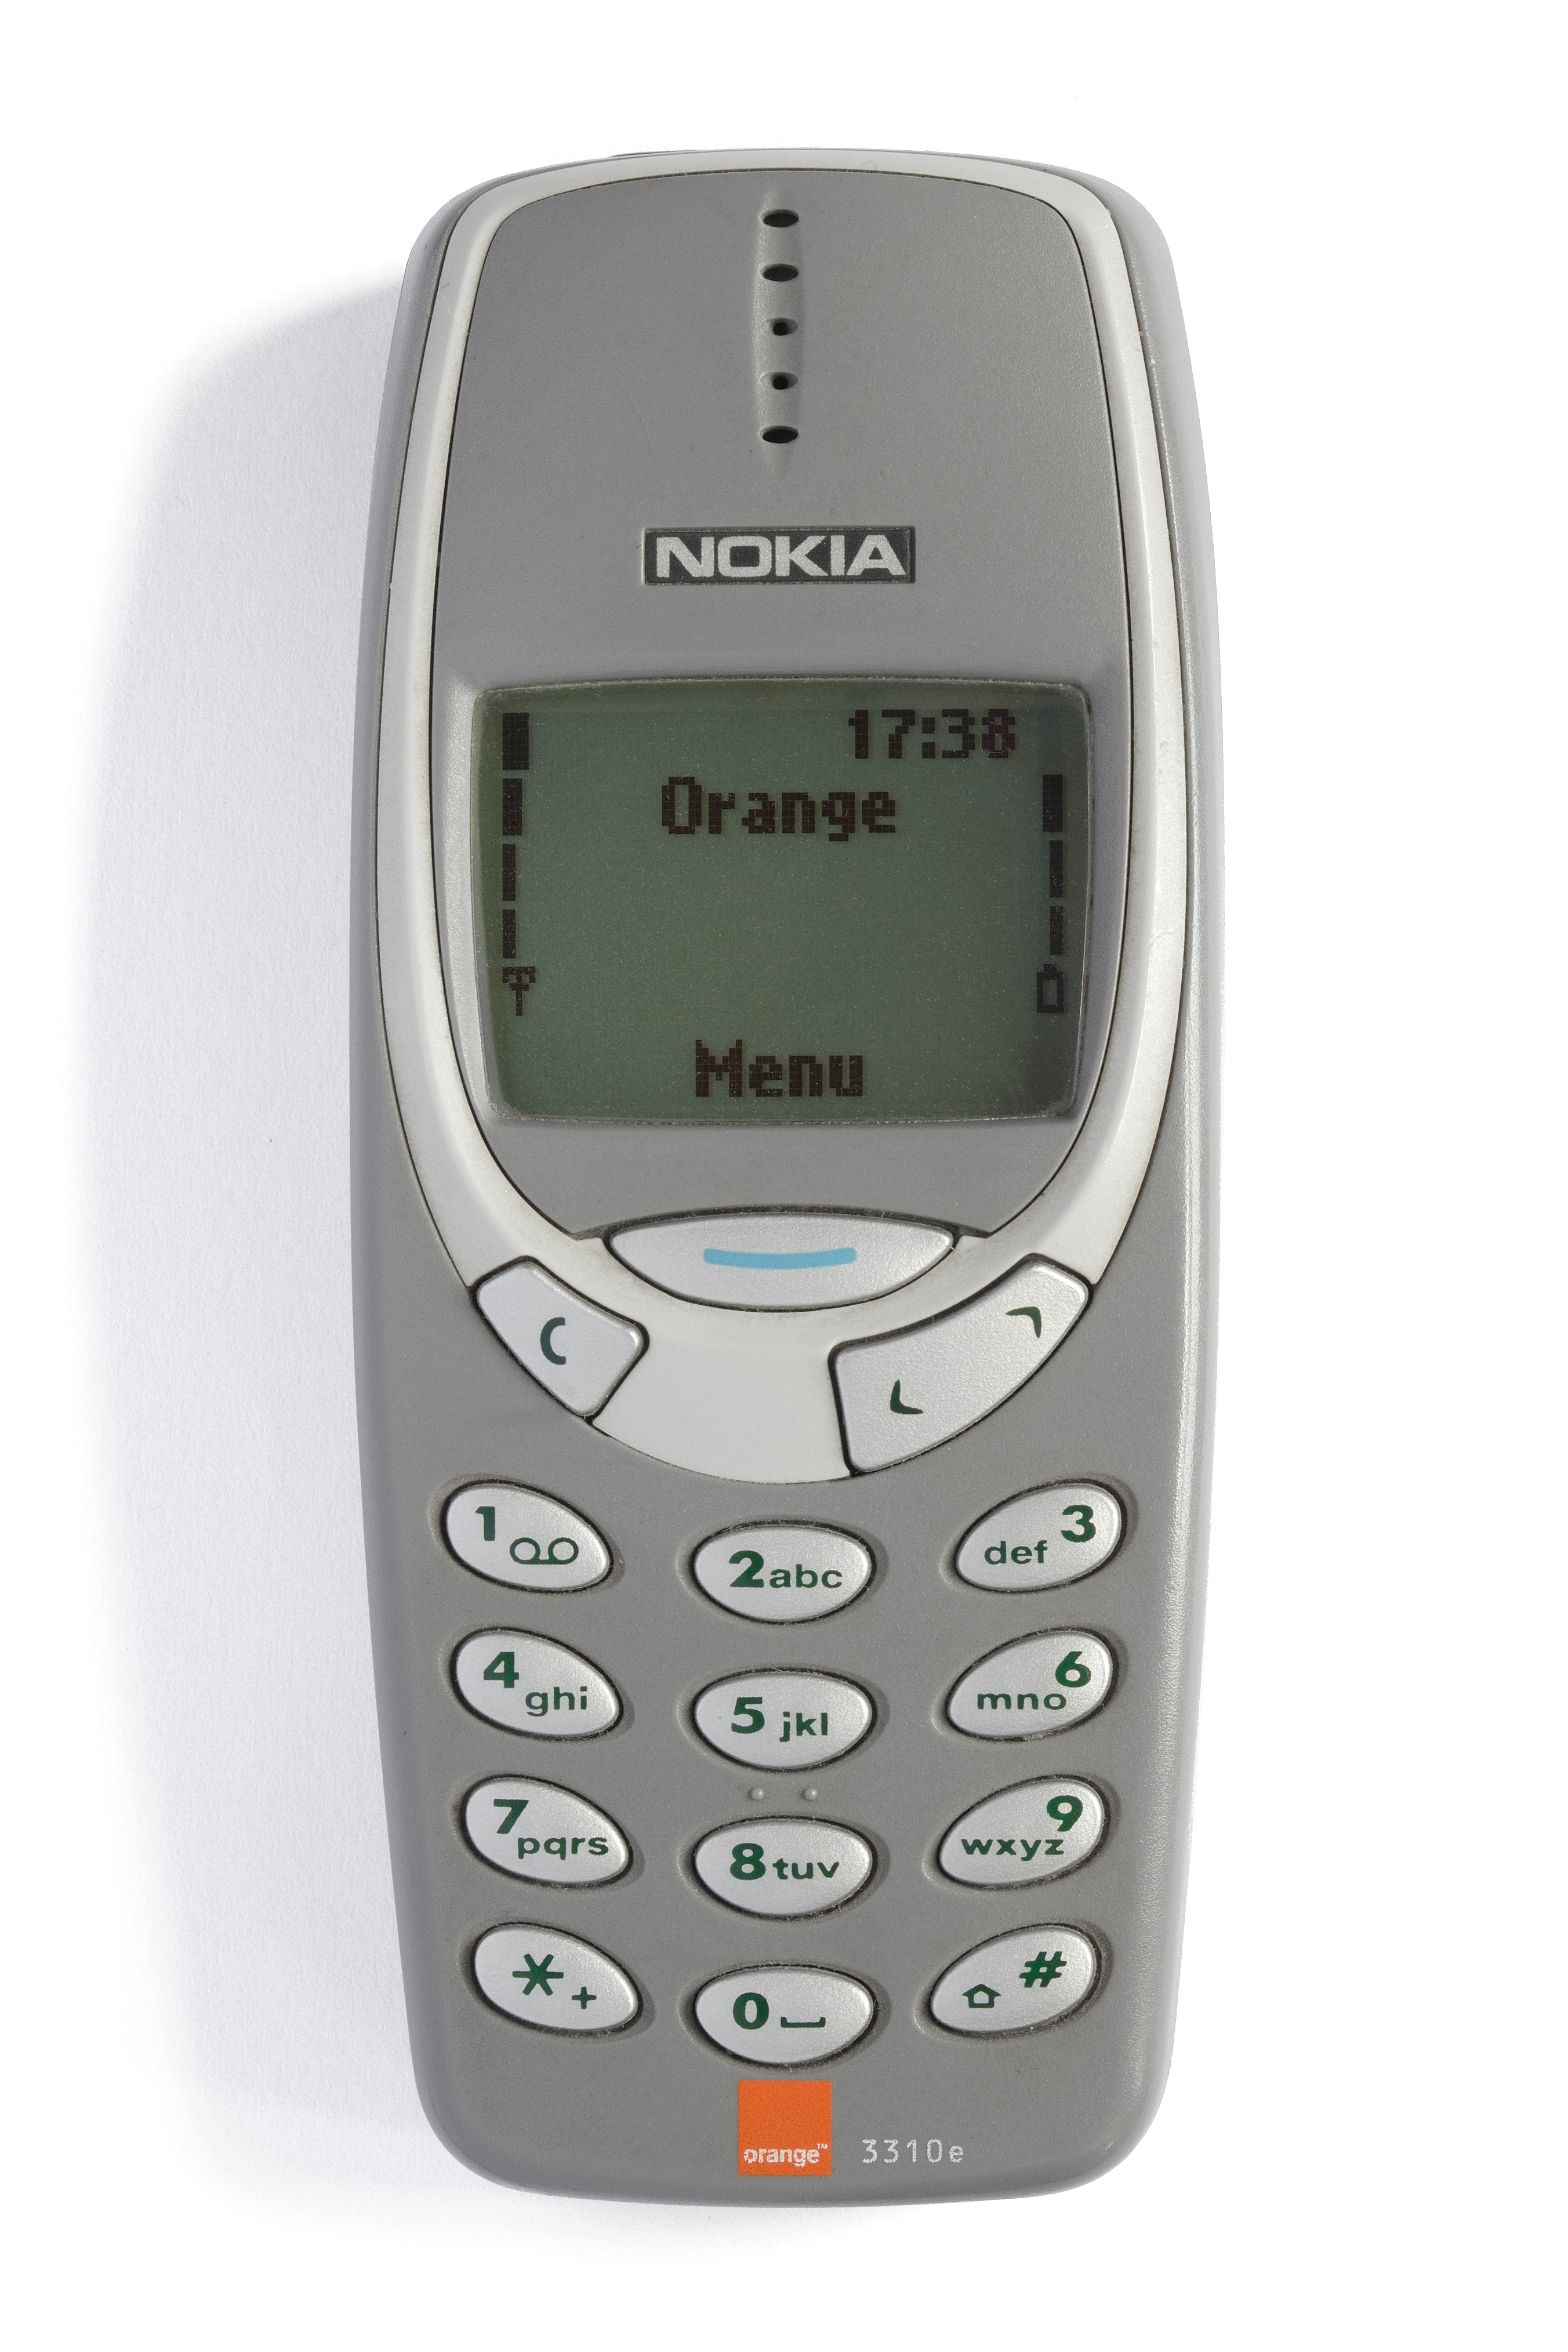 Nokia_3310_grey_front_tidied_and_enhanced.jpg